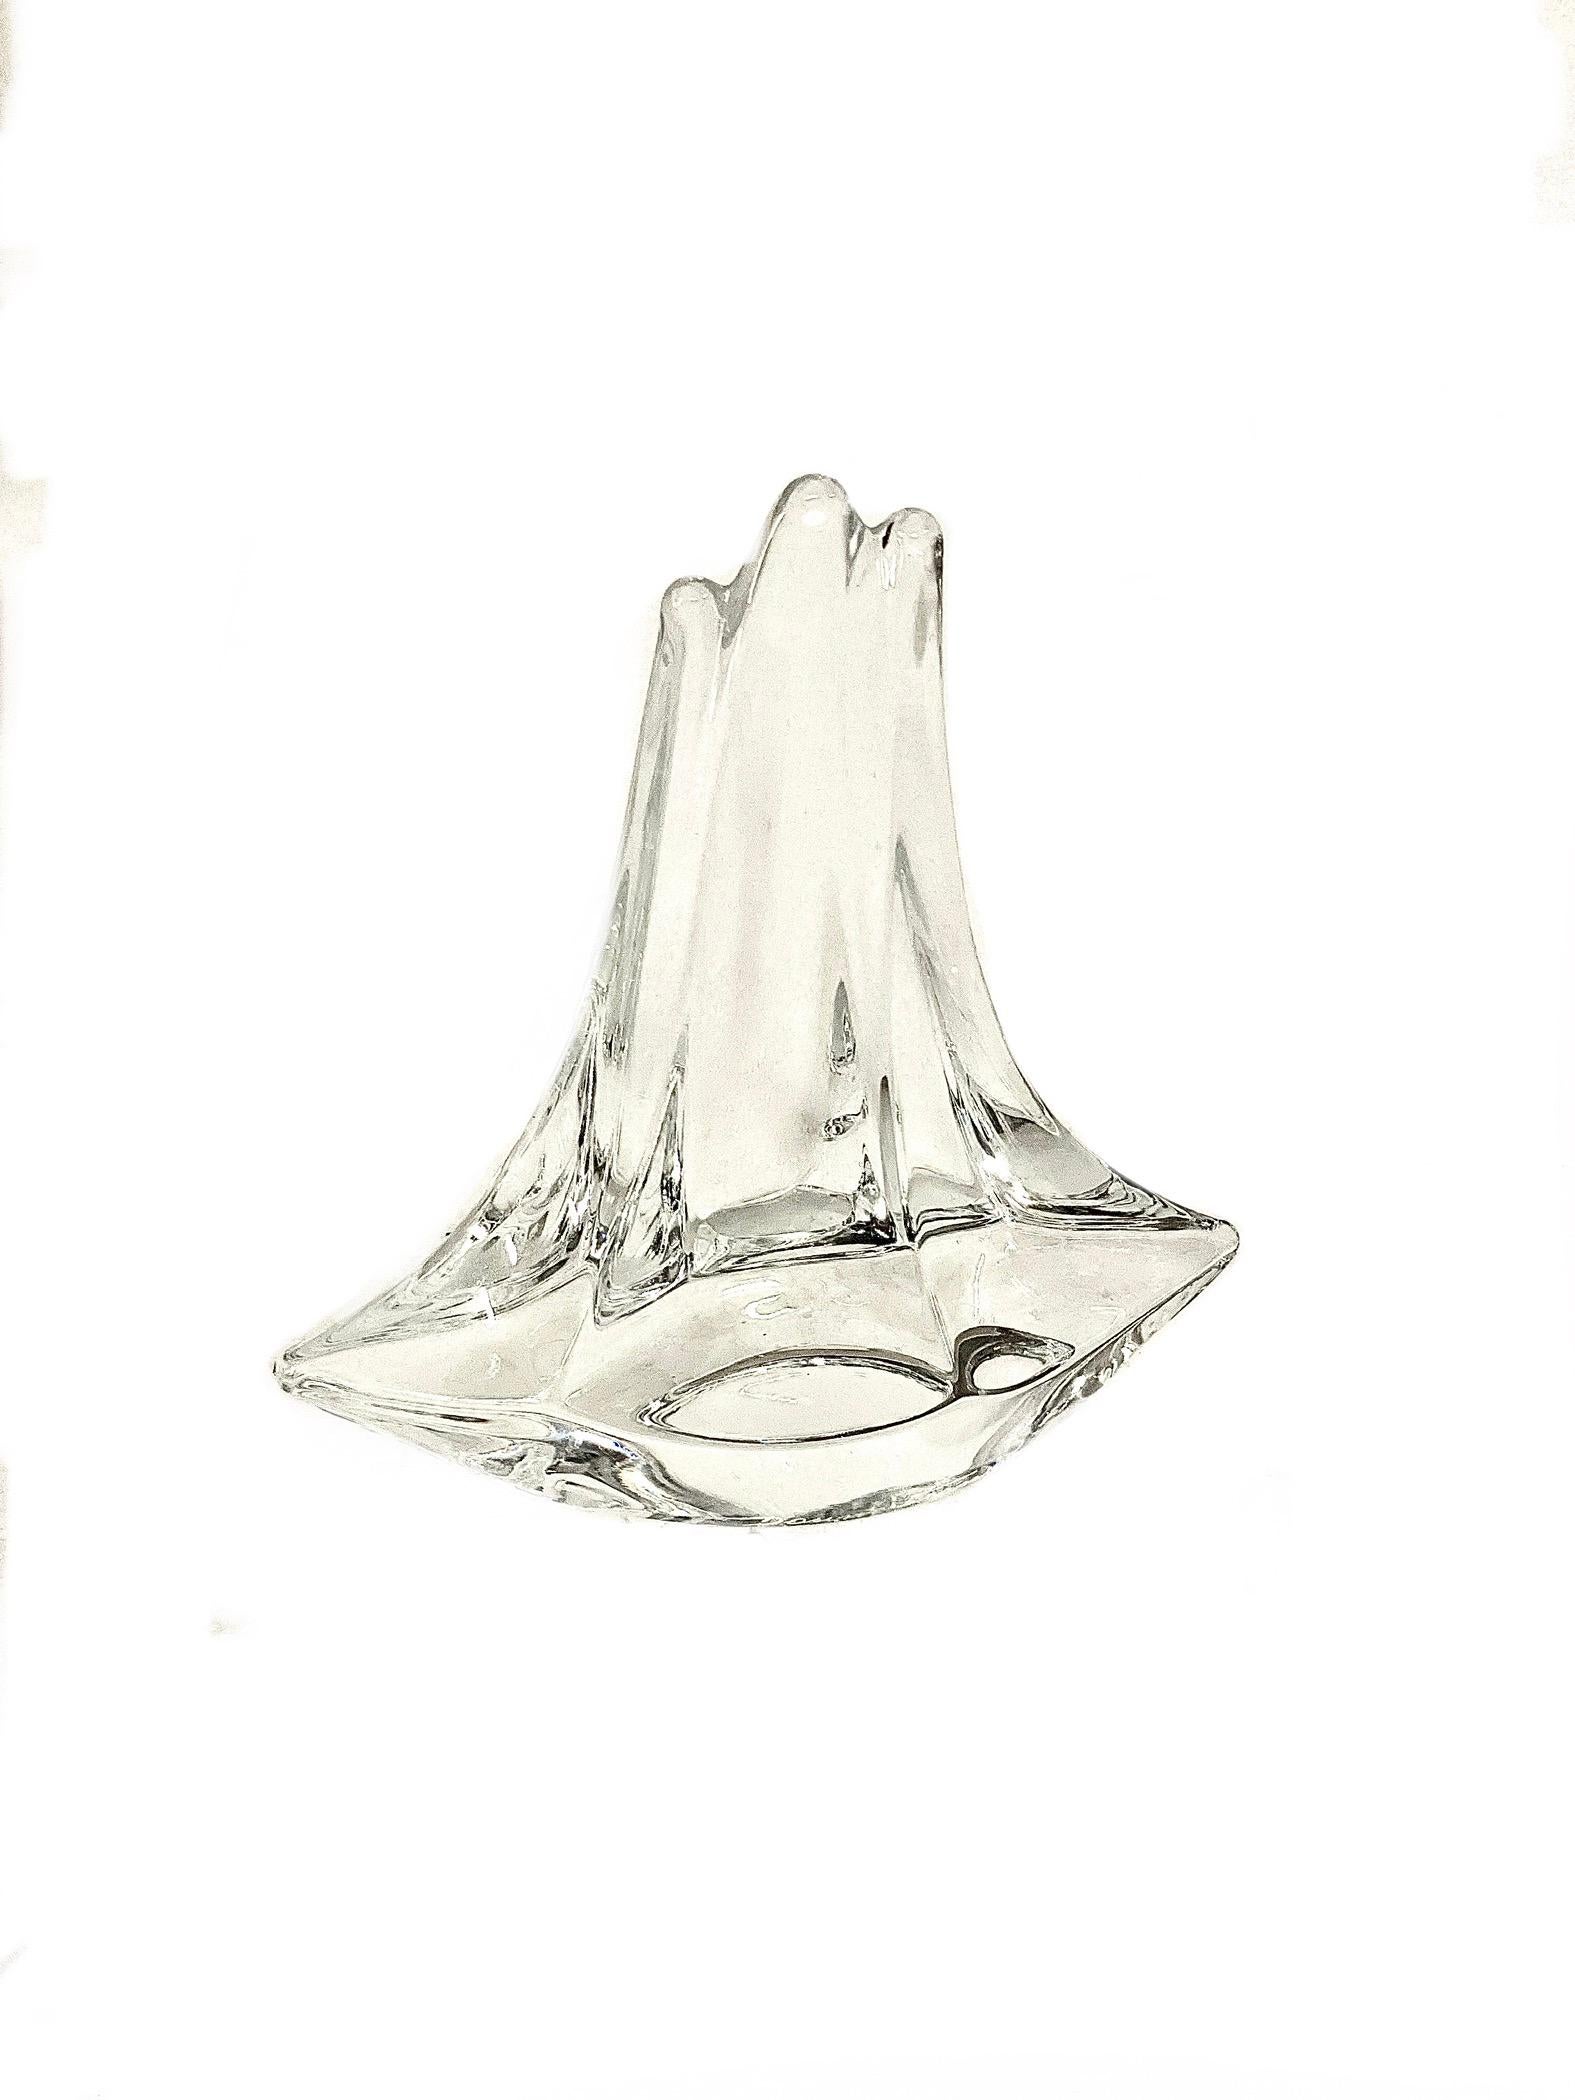 An intriguing crystal ornament, or paperweight, in the shape of a stylised three-masted sailing boat, made by legendary crystal manufacturer DAUM France. In excellent condition, its sparkling clarity and abstract lines capture and reflect the light